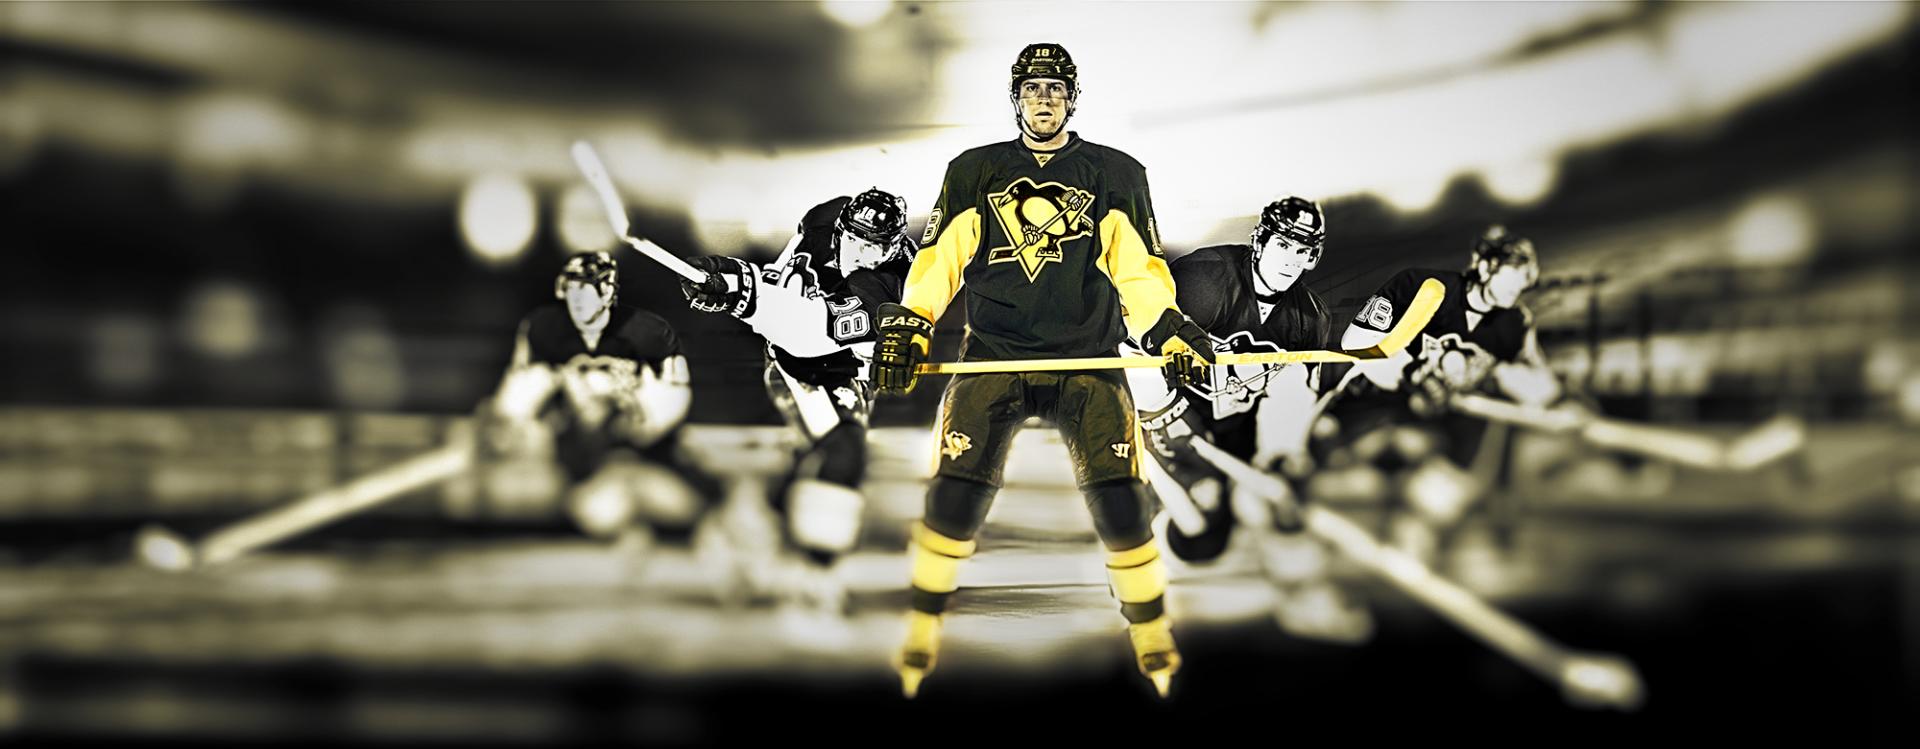 James Neal Poster